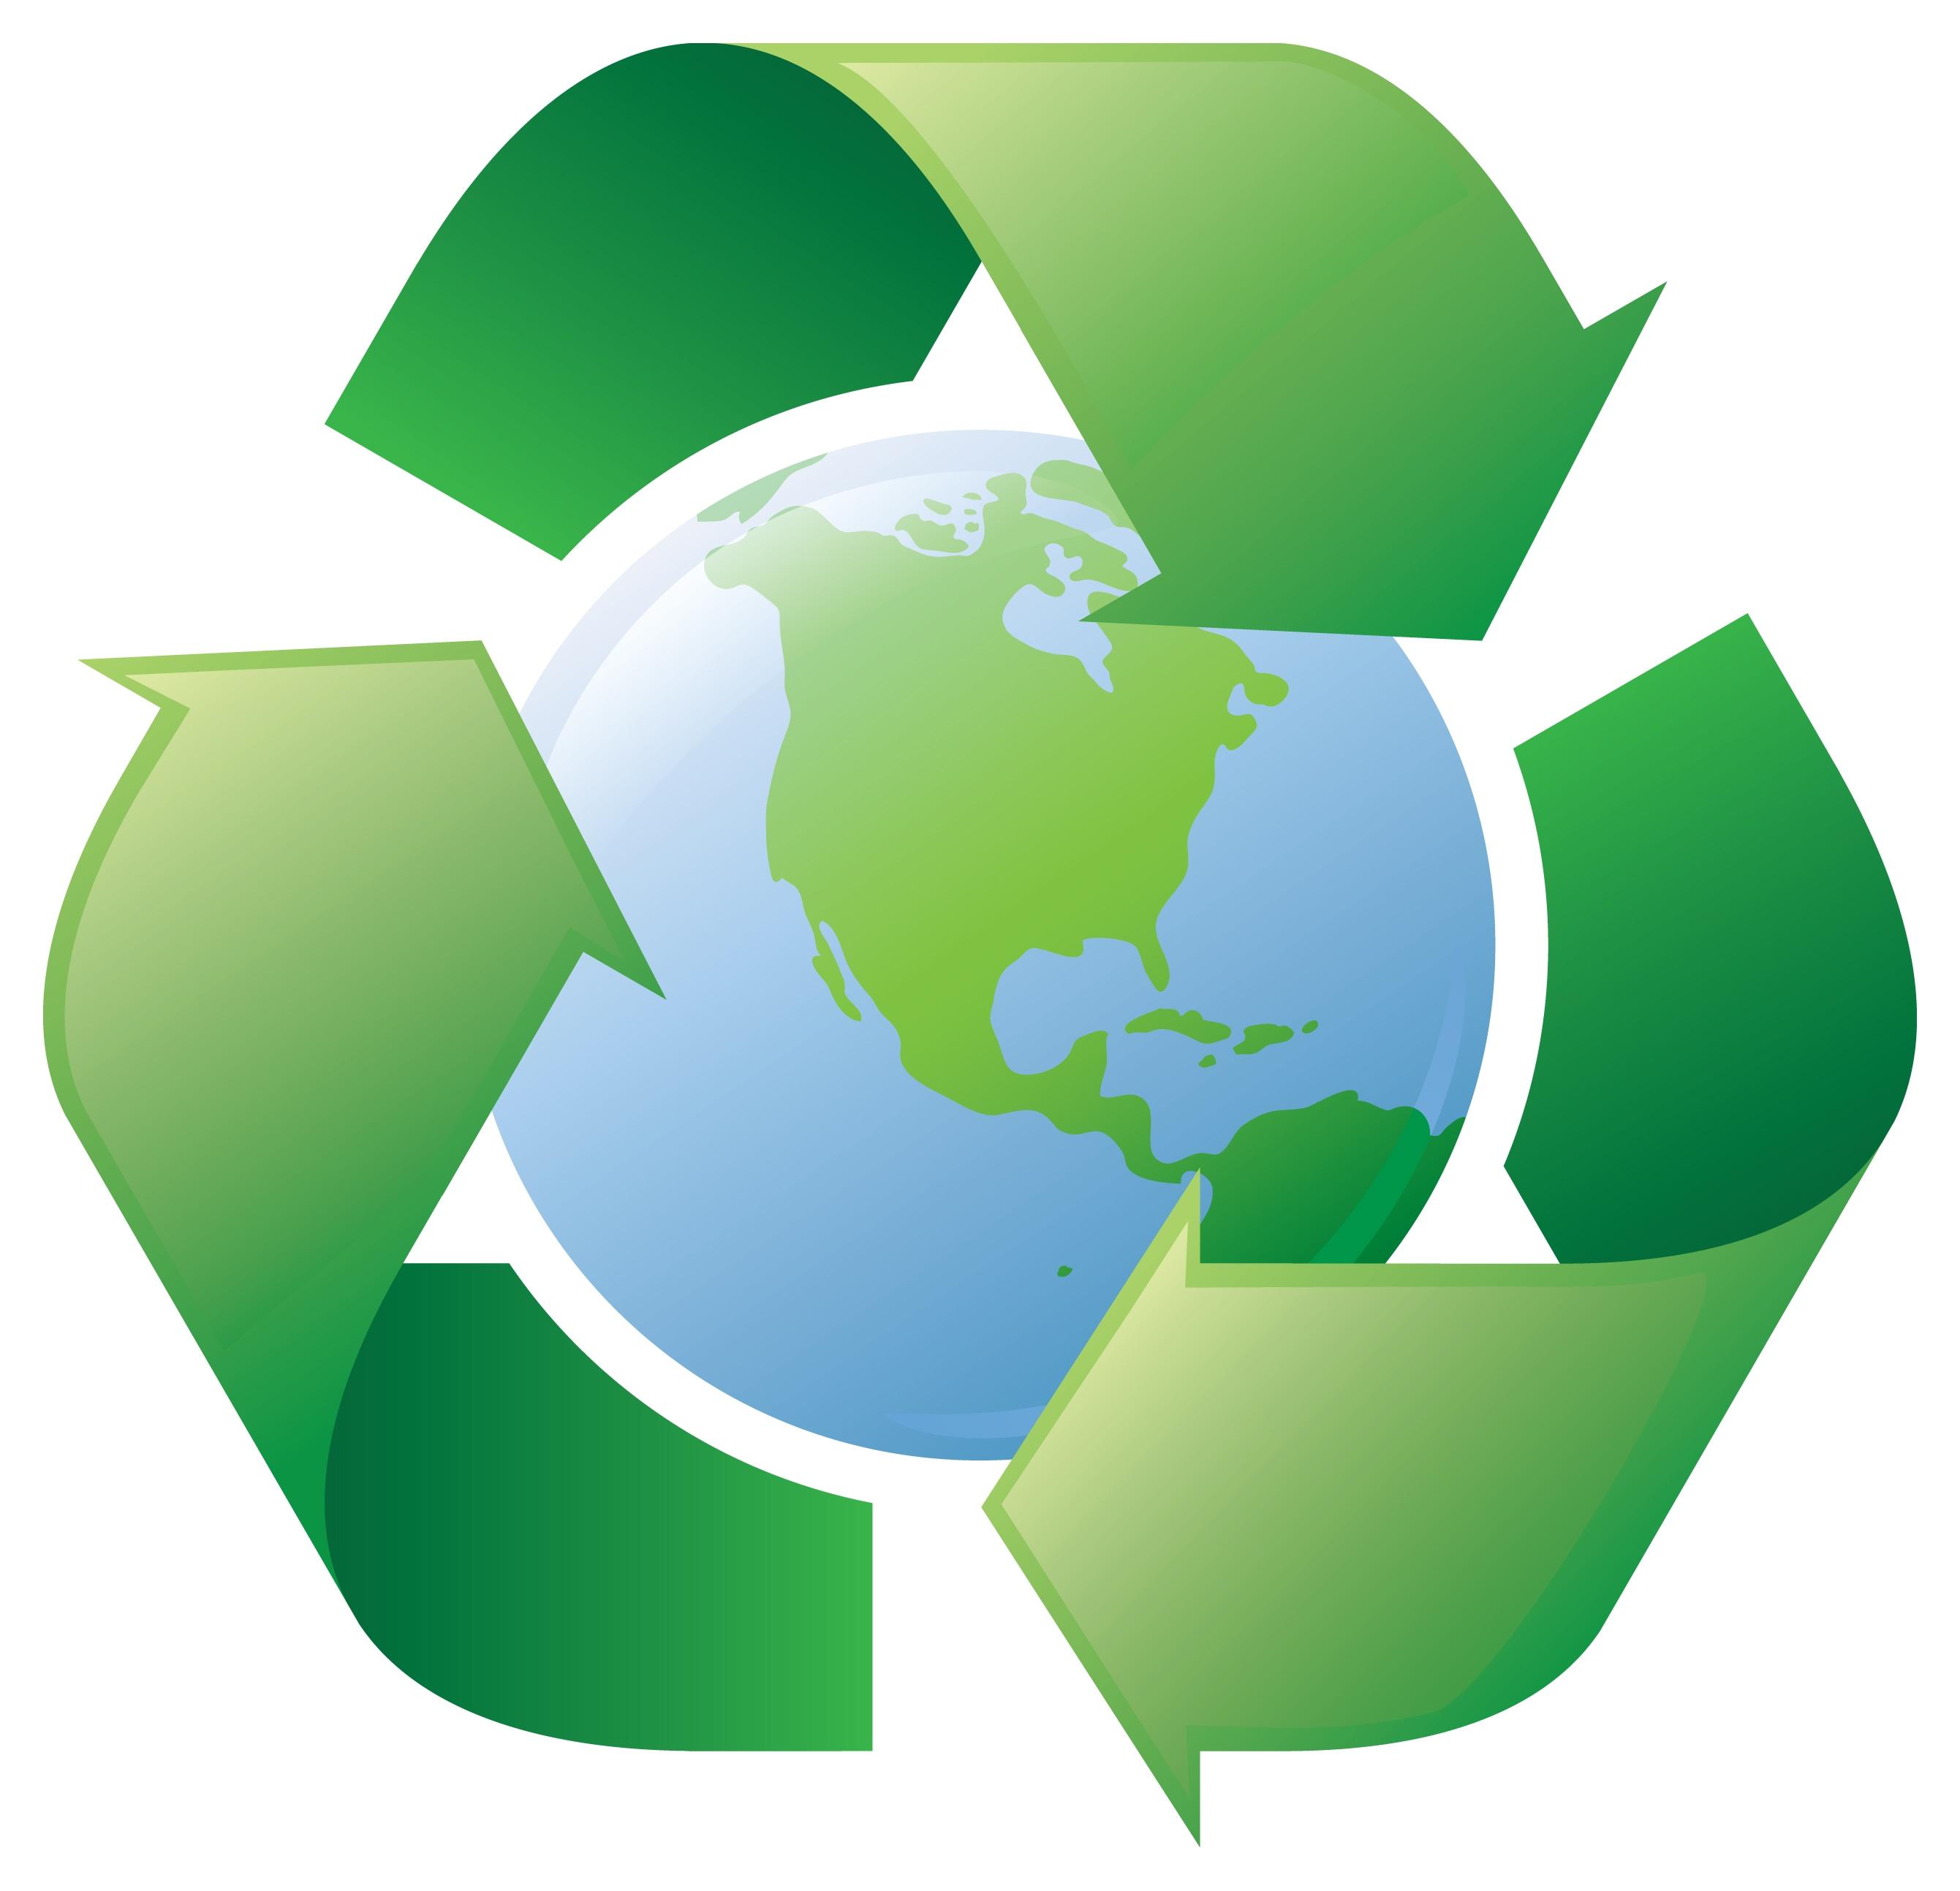 Free Recycling Image Desktop Background